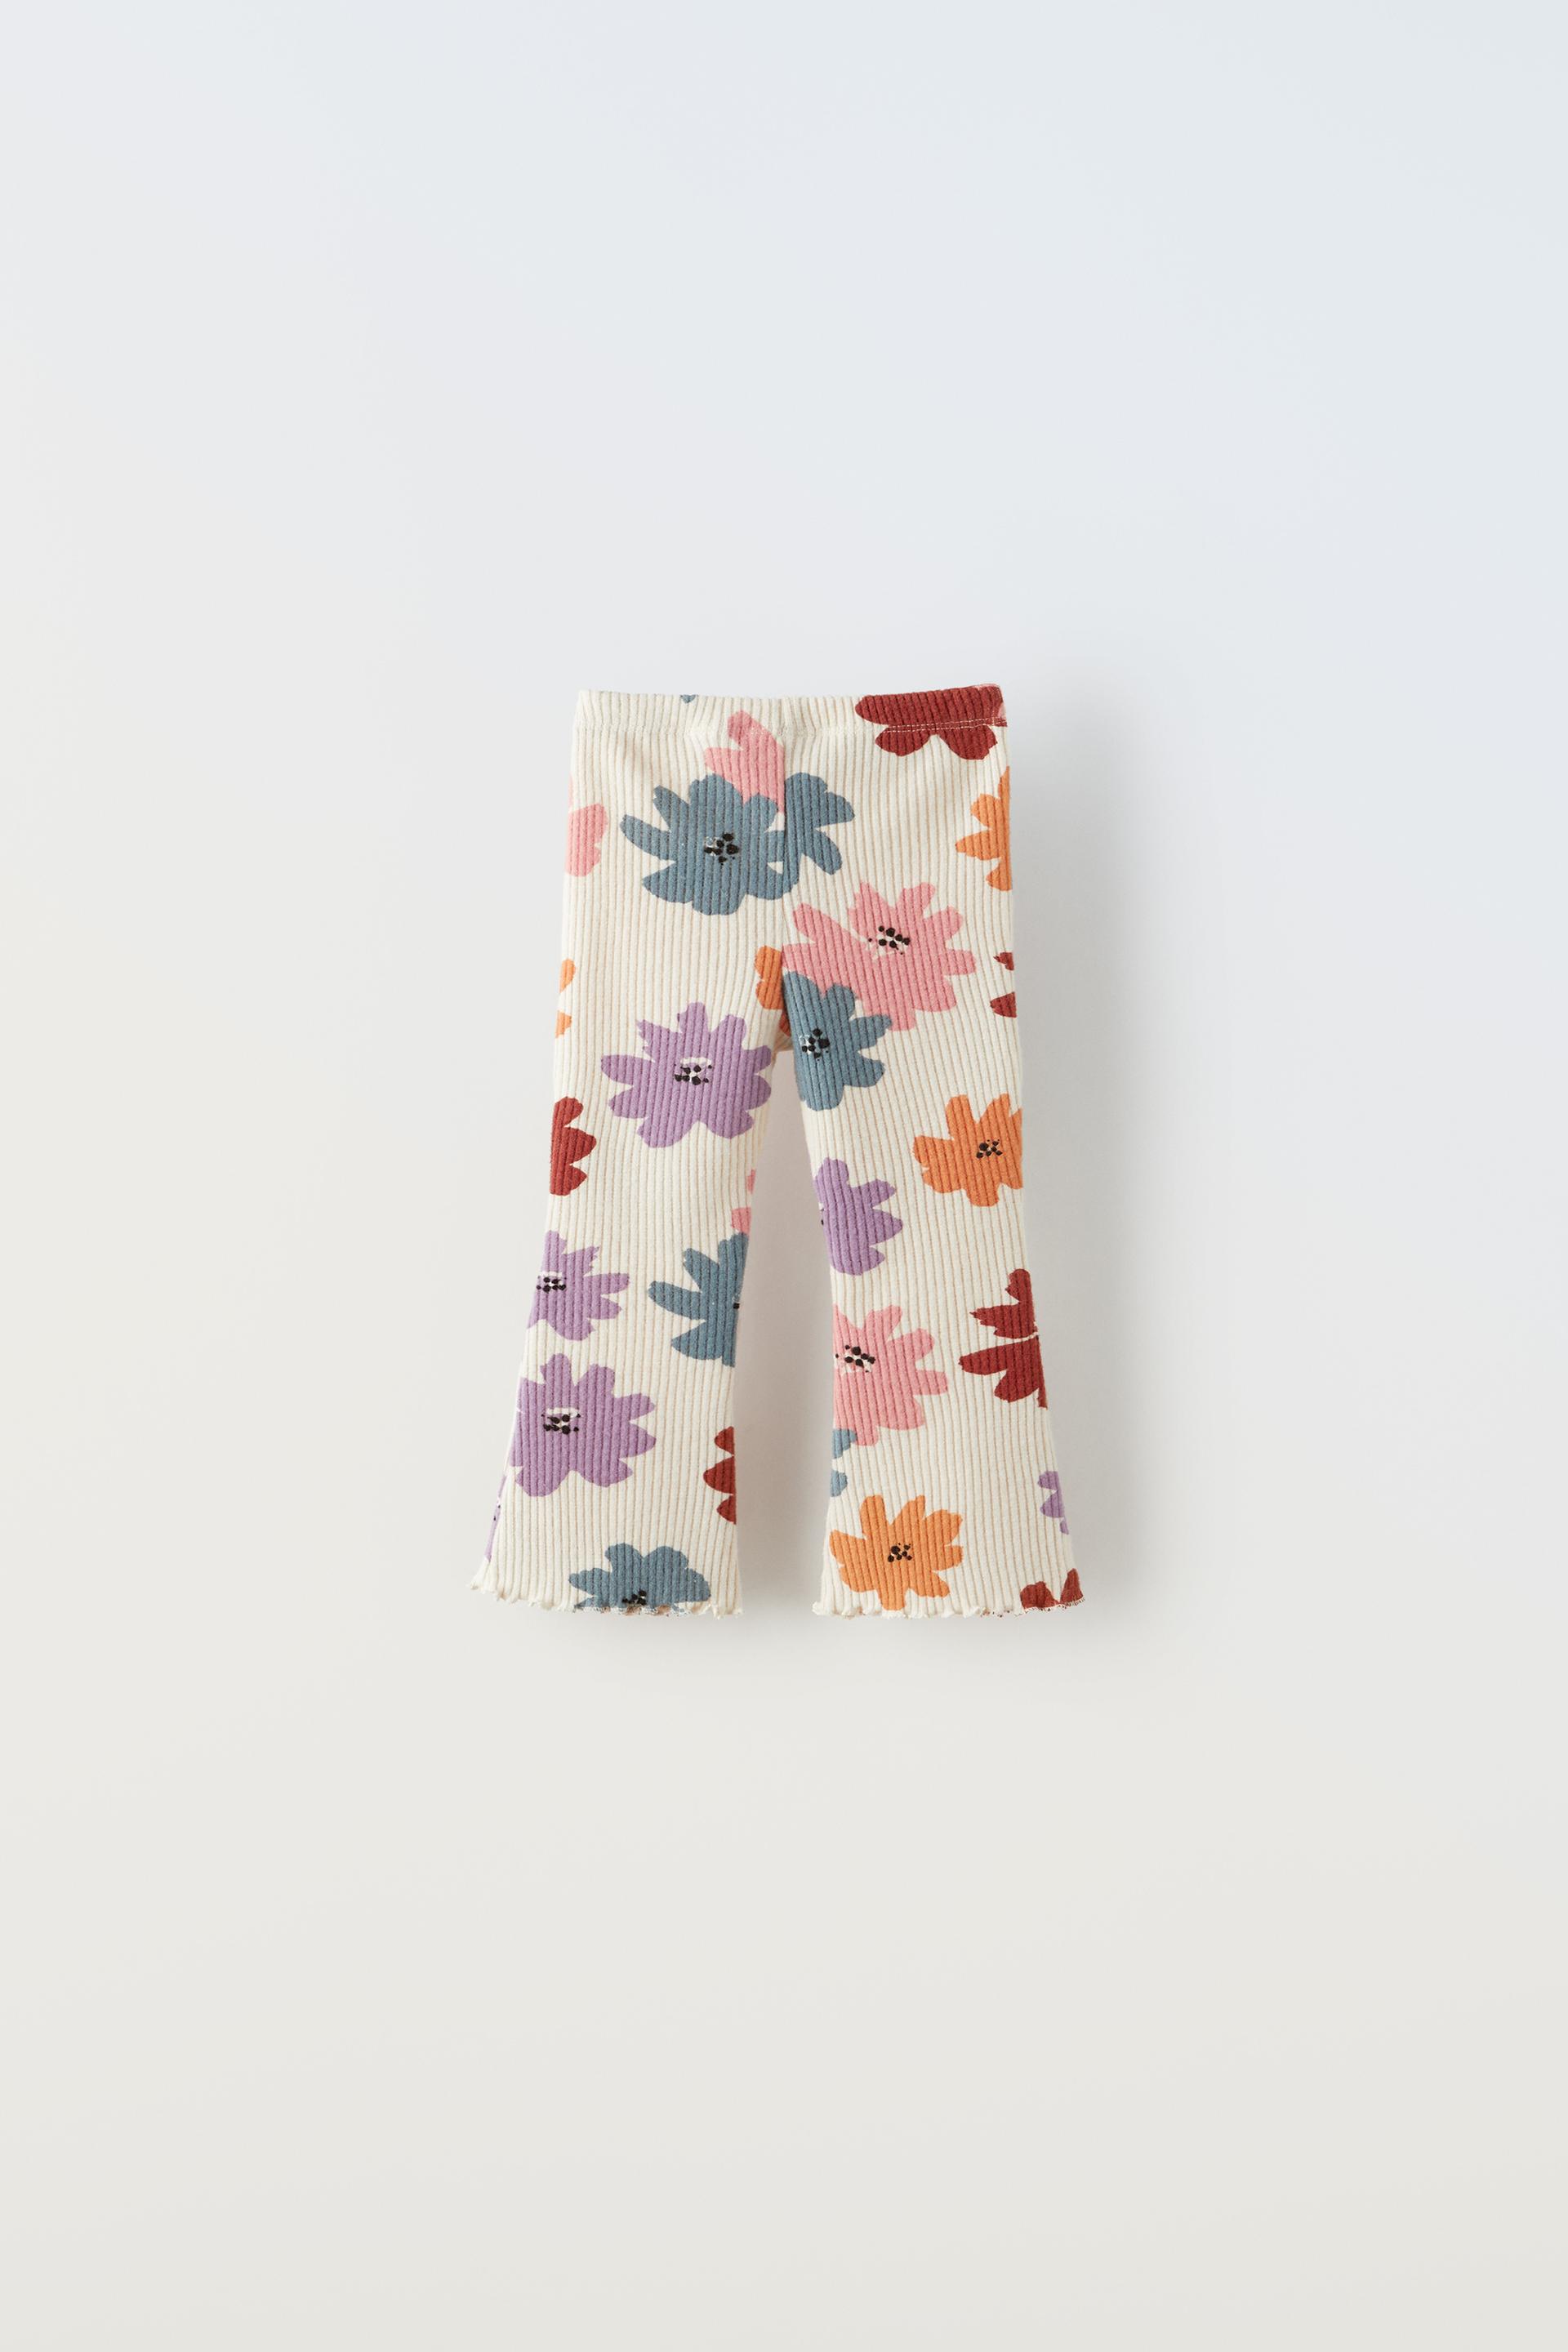 Soft Surroundings Floral Stretch Pull On Pants Size 1X - $45 New With Tags  - From Bambi